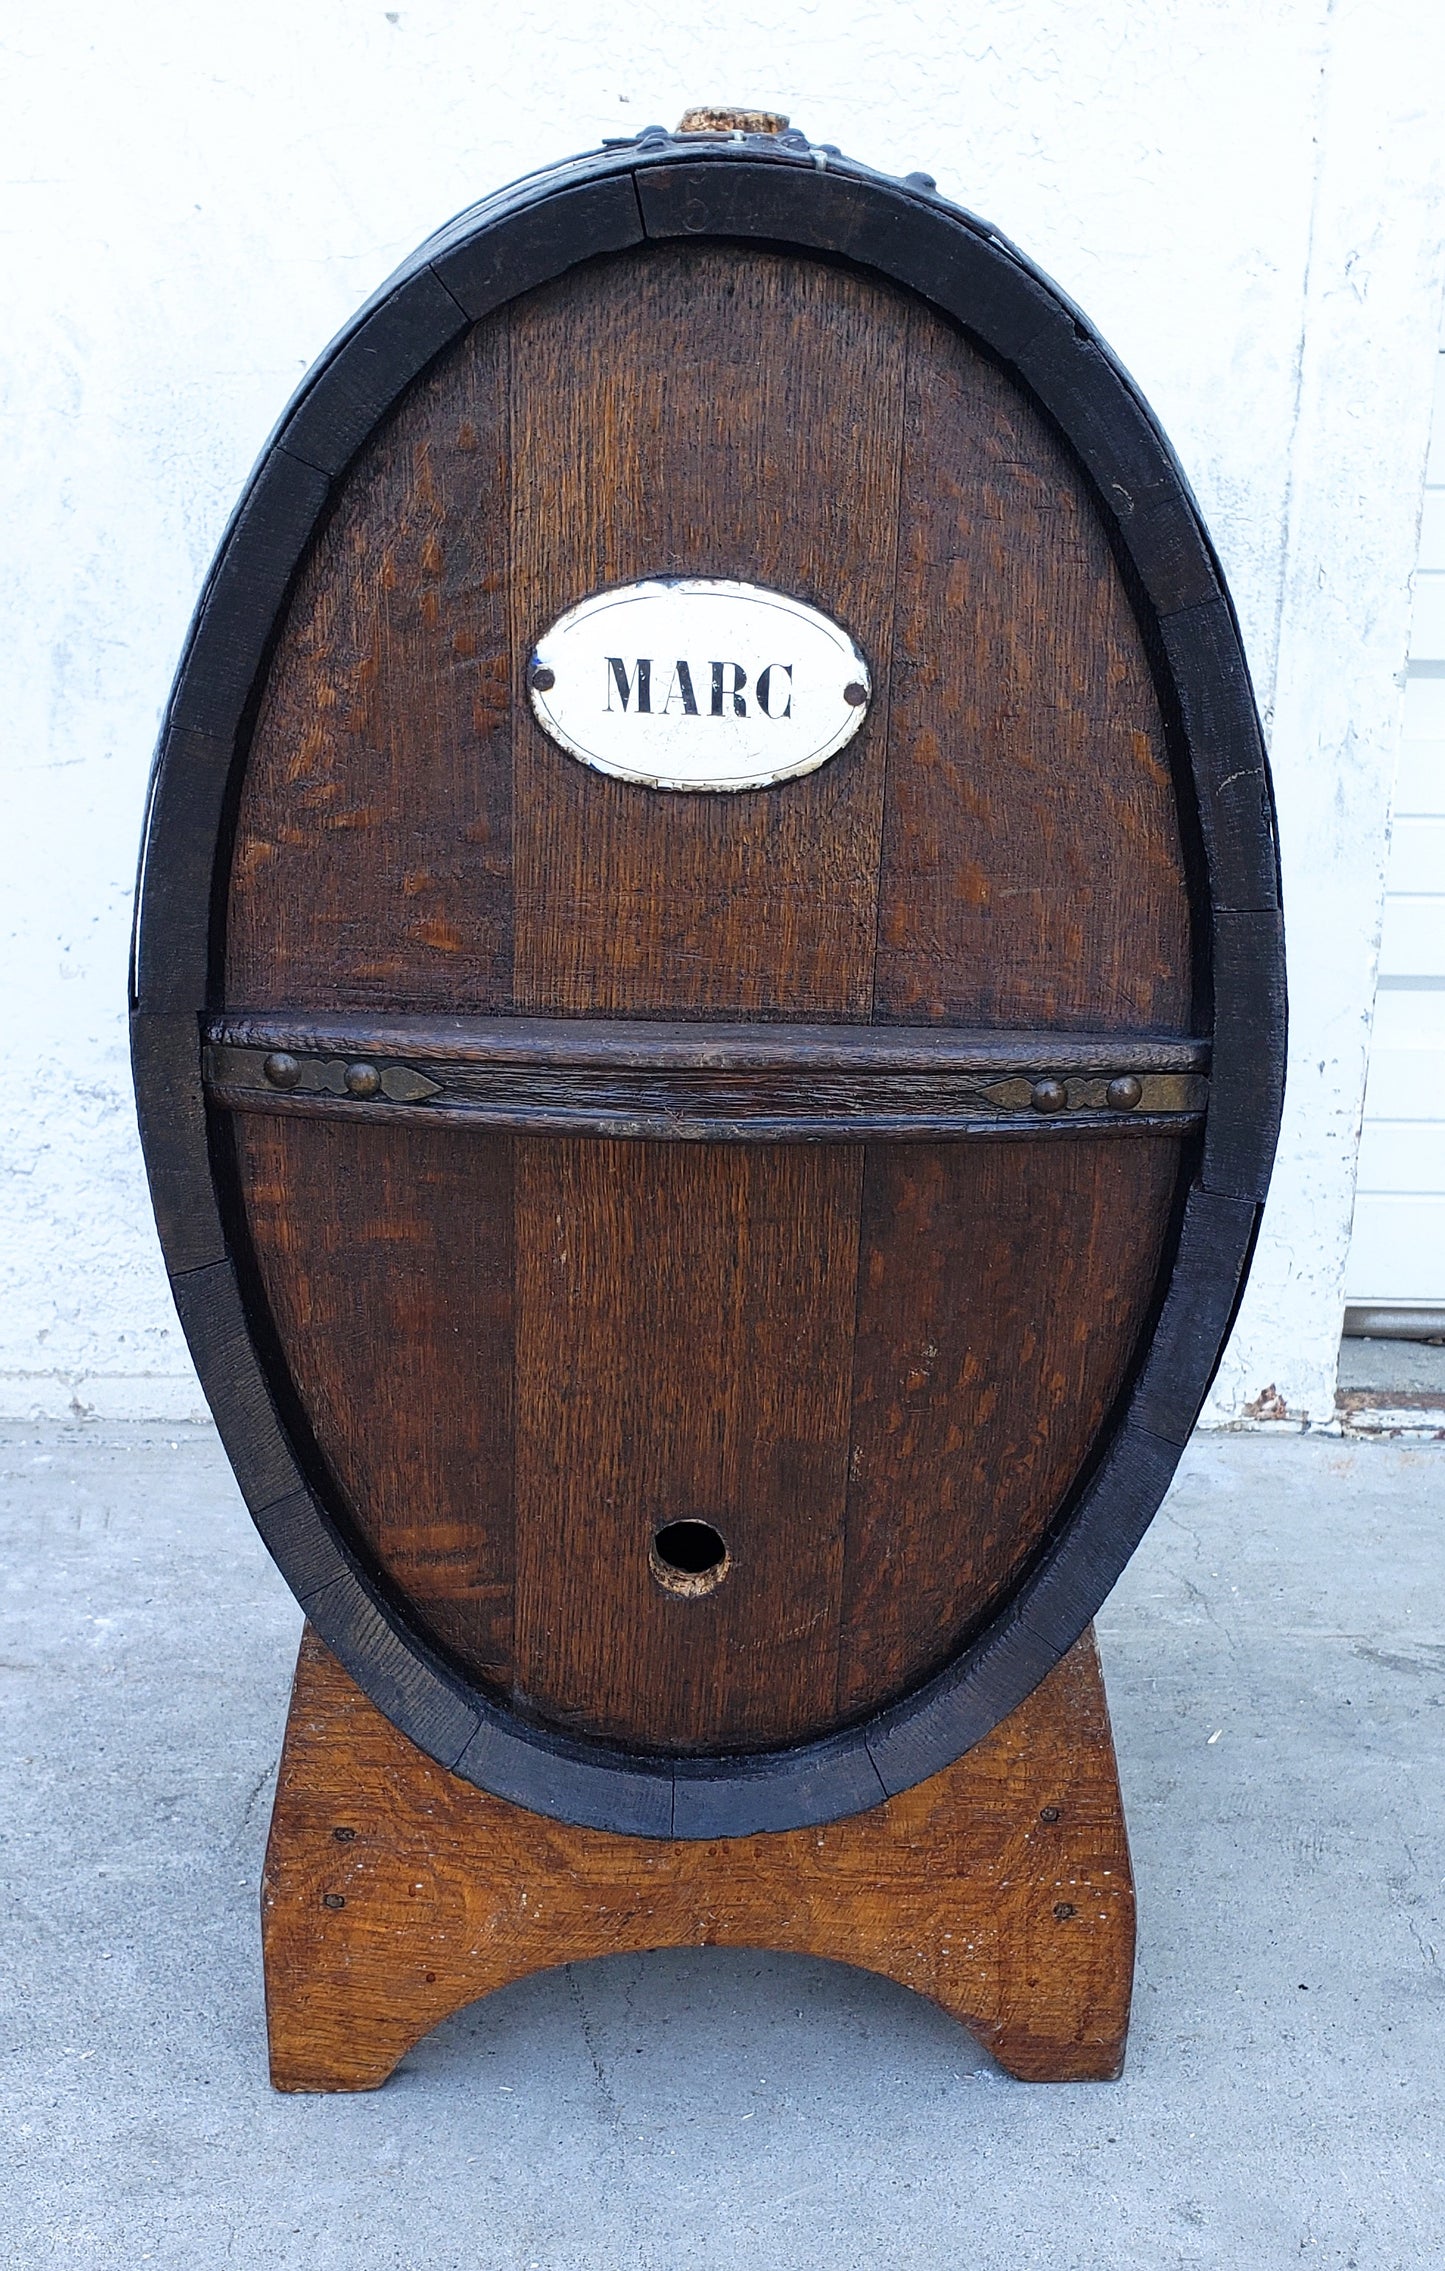 Small Wine Barrel with "Marc" Label